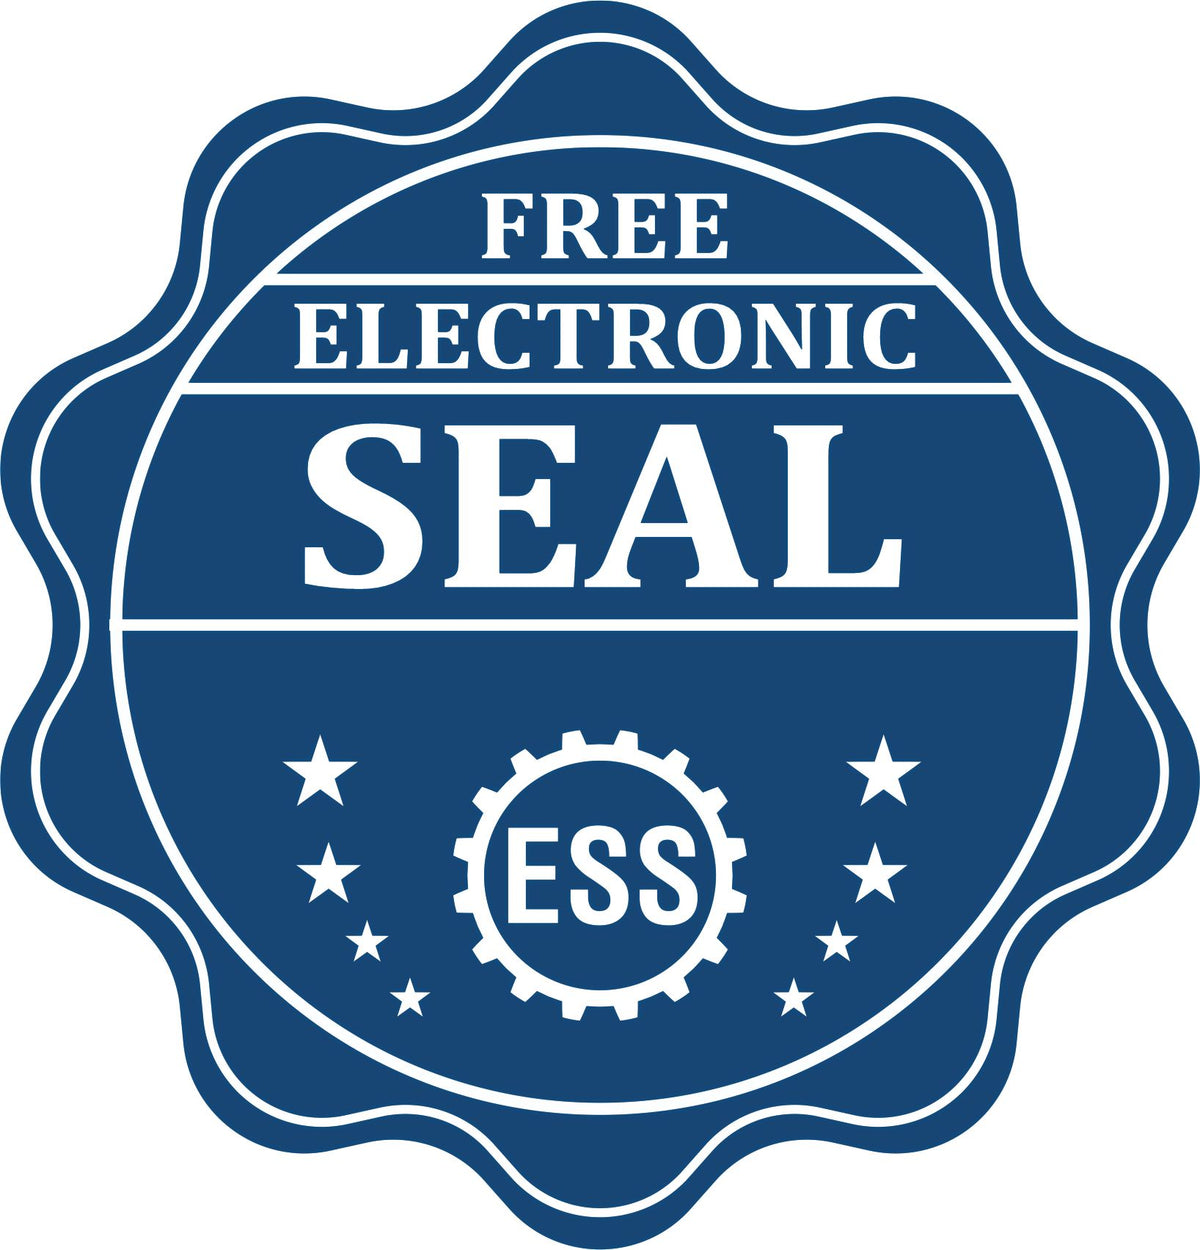 A badge showing a free electronic seal for the Gift Alaska Architect Seal with stars and the ESS gear on the emblem.